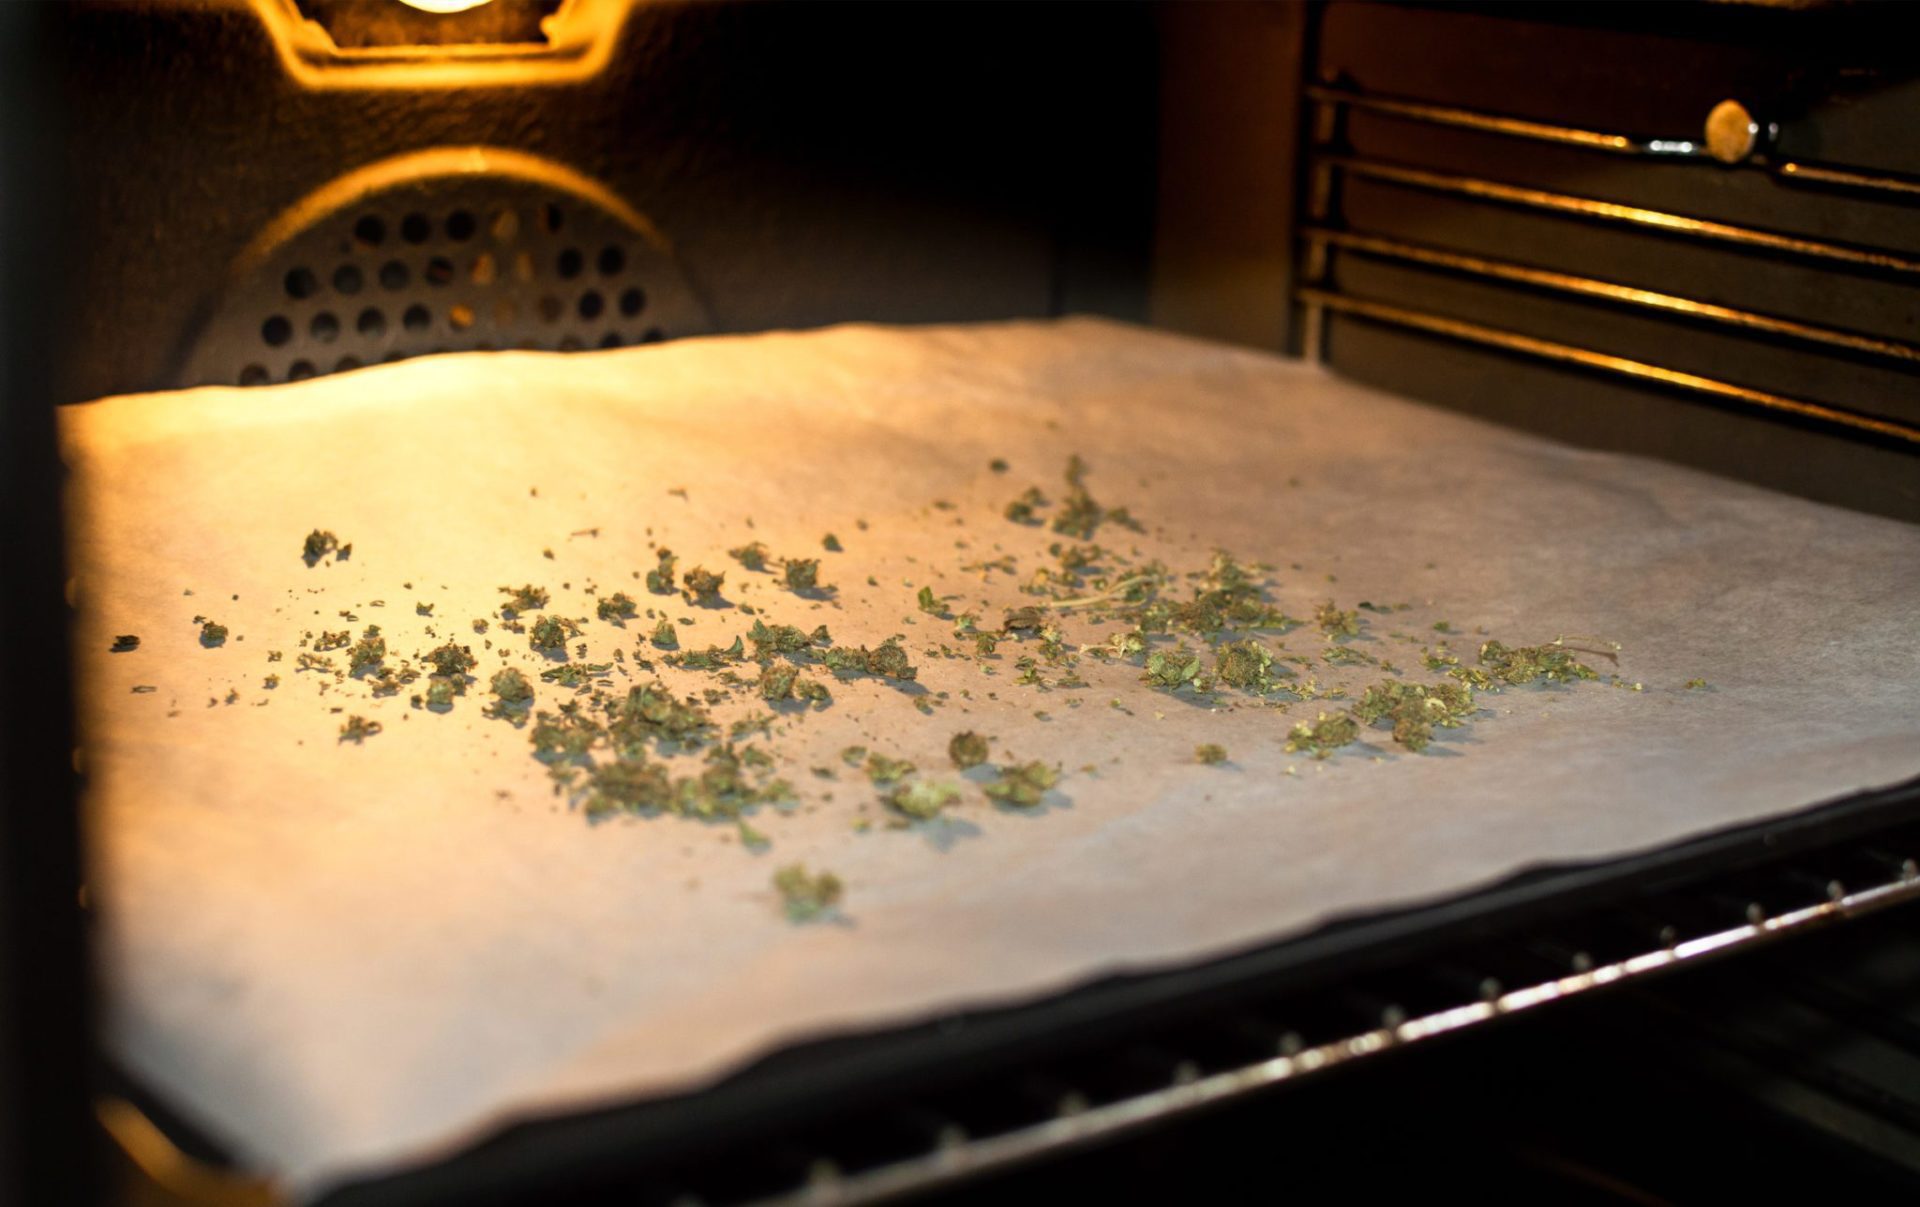 decarboxylation process - heating raw cannabis inside an oven